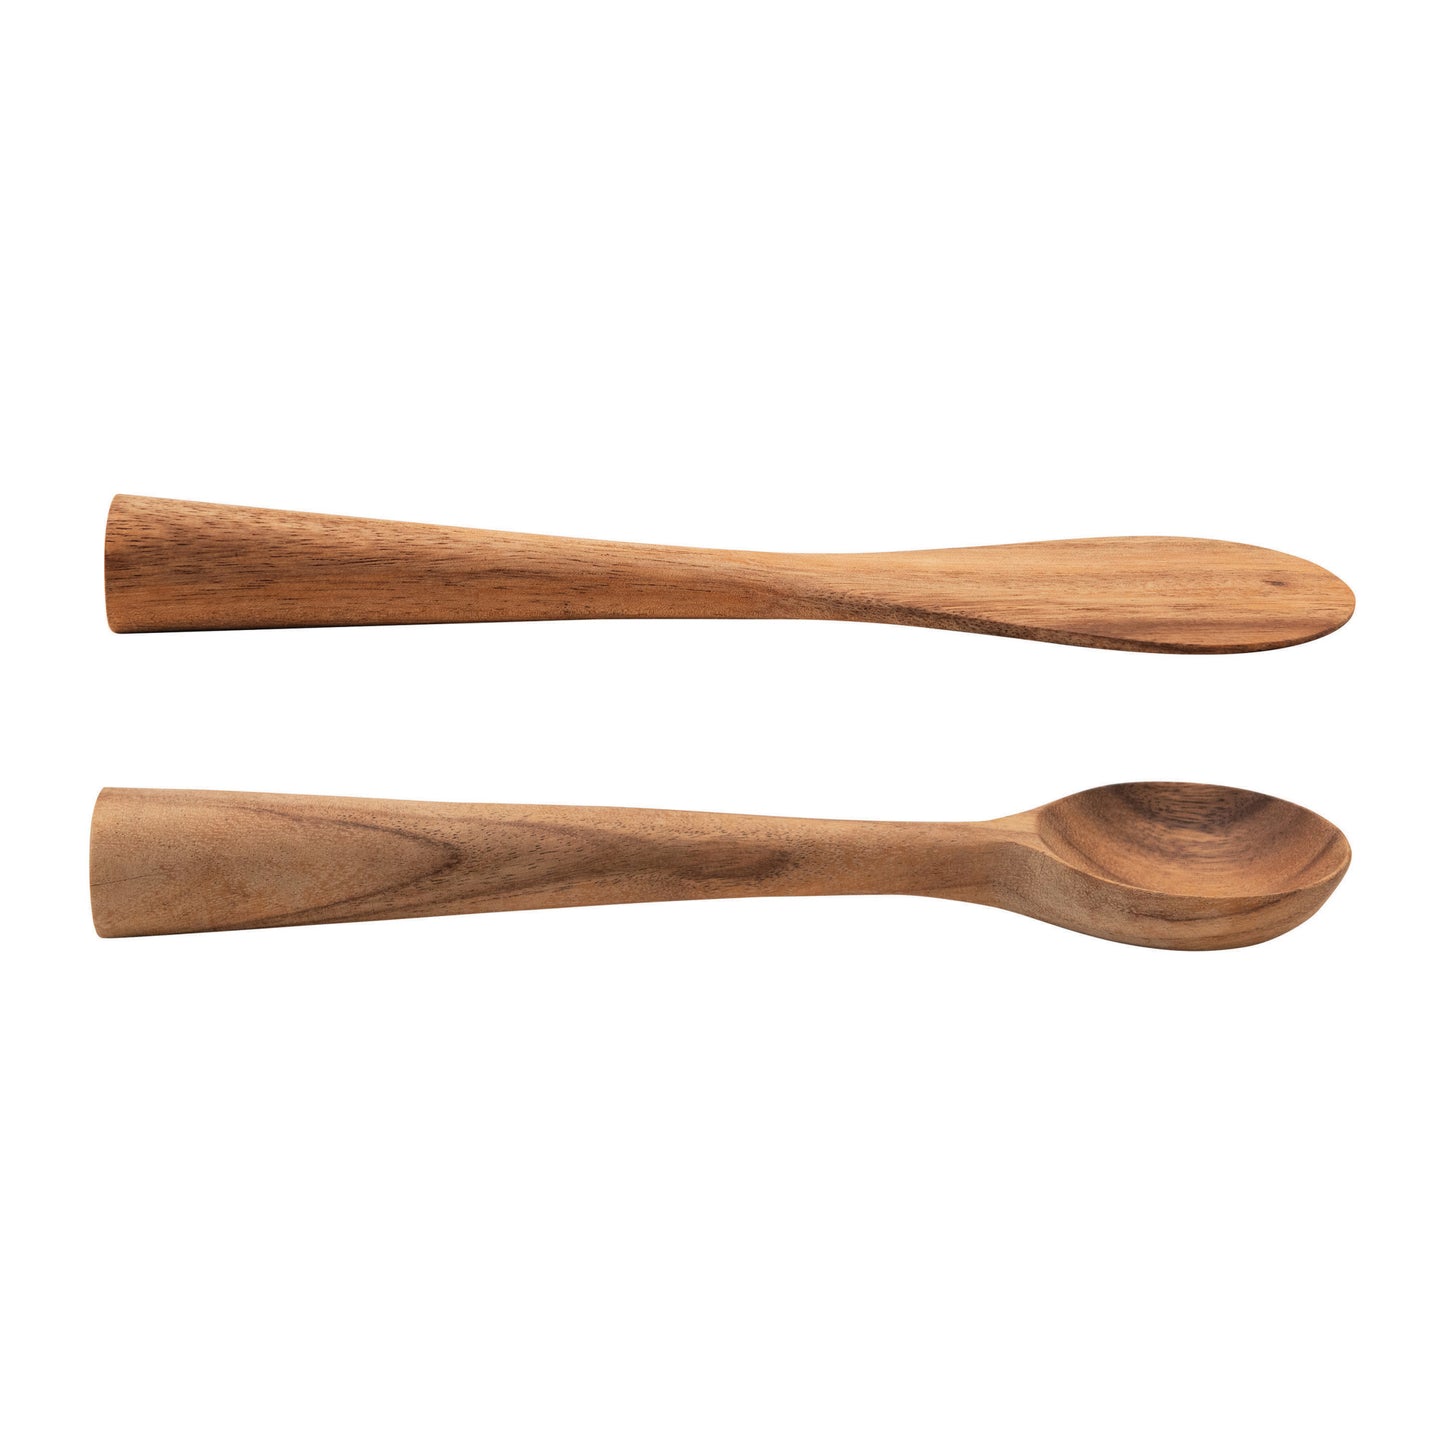 Hand-Carved Acacia Wood Standing Spoon, 2 Styles